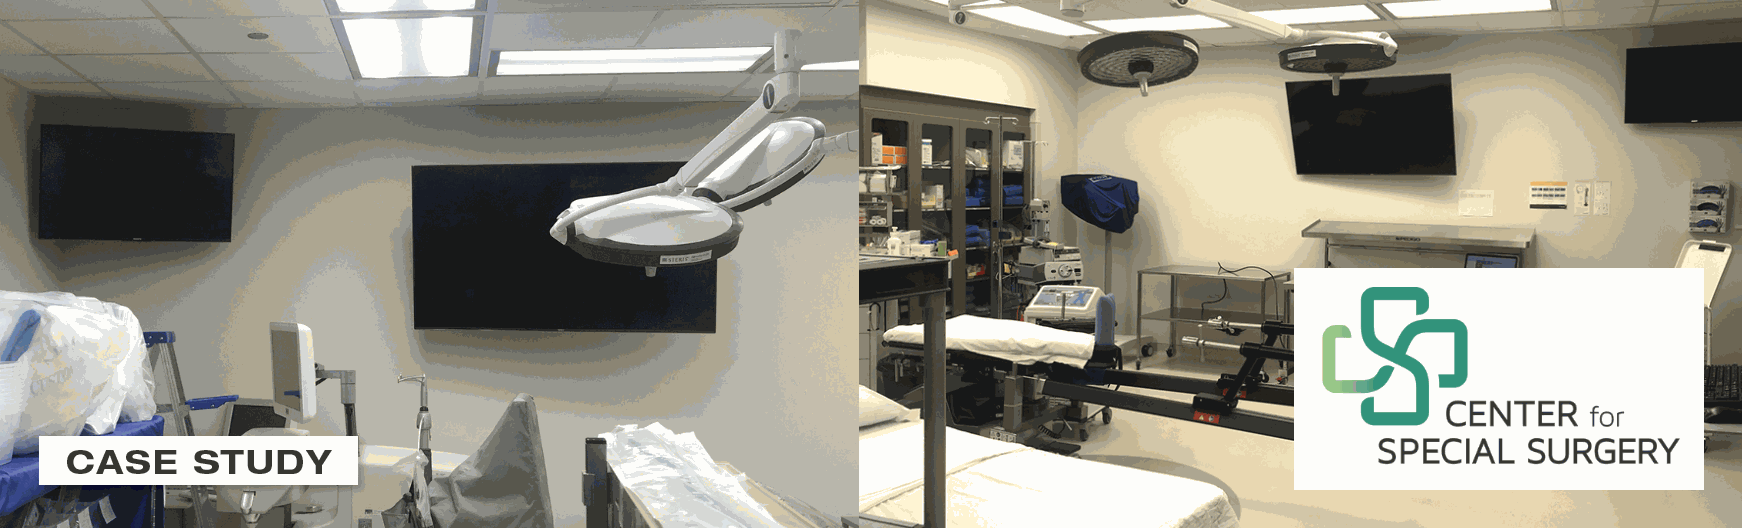 Outpatient Surgical Center Operates More Efficiently with the Help of Key Digital Matrix Switcher and HDMI Extenders for central monitoring system